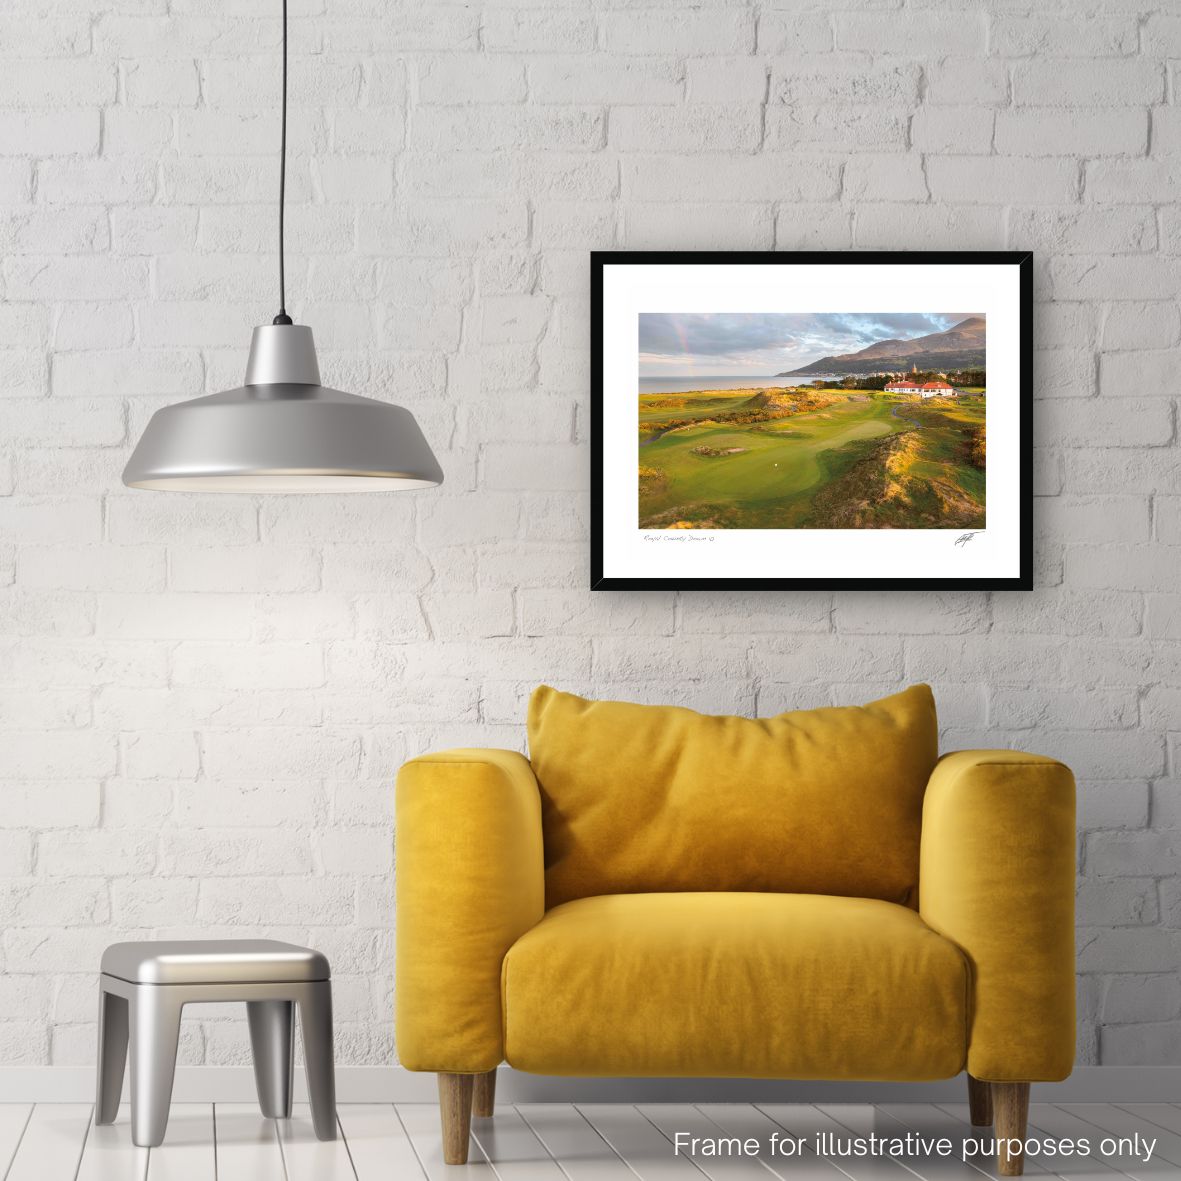 ROYAL COUNTY DOWN 10TH PRINT BY ADAM TOTH IN BLACK FRAME